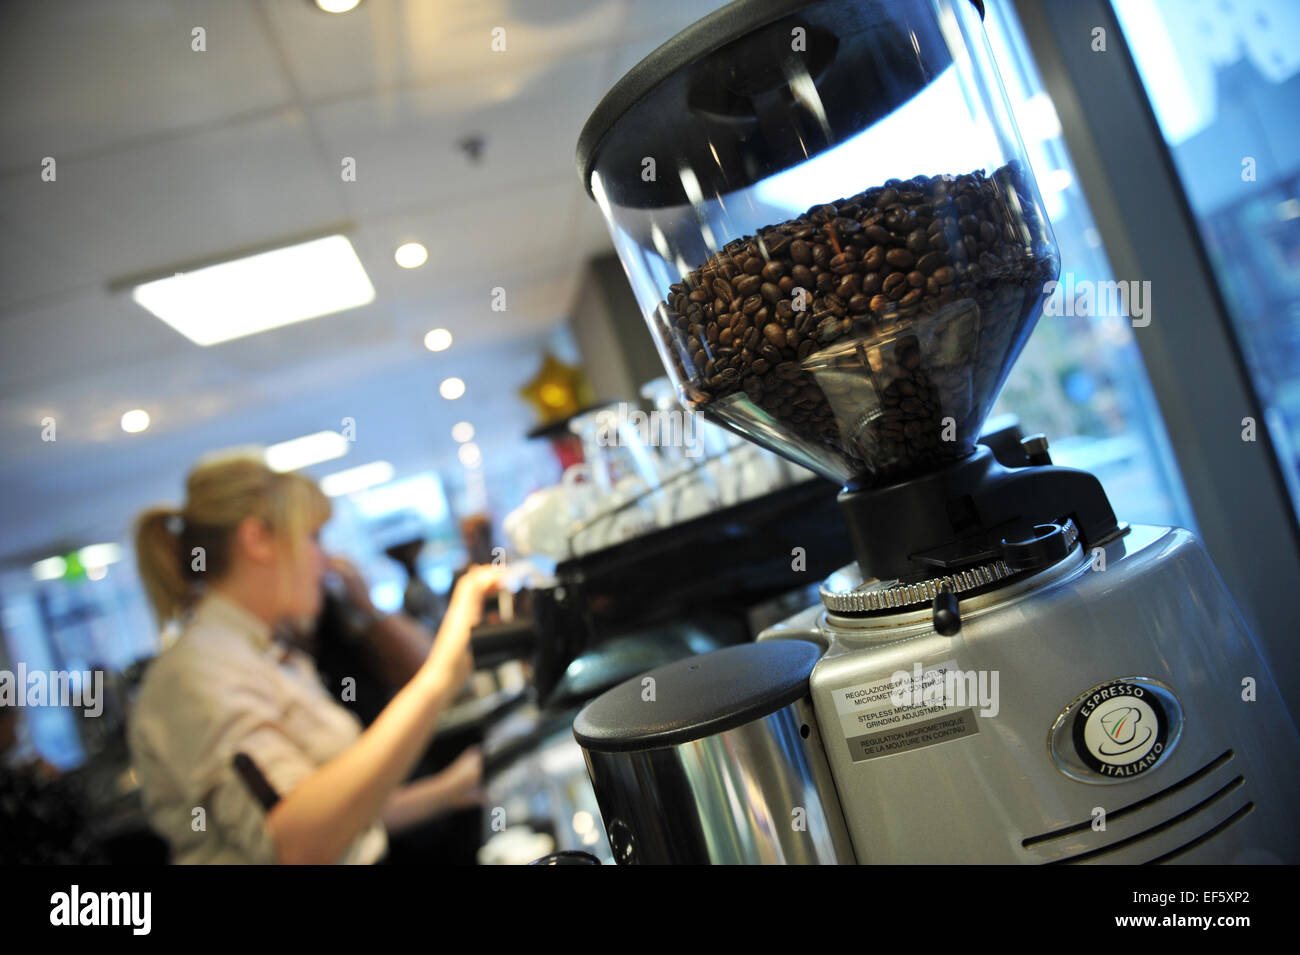 Coffee grinder and barista in a cafe, Leeds. Stock Photo